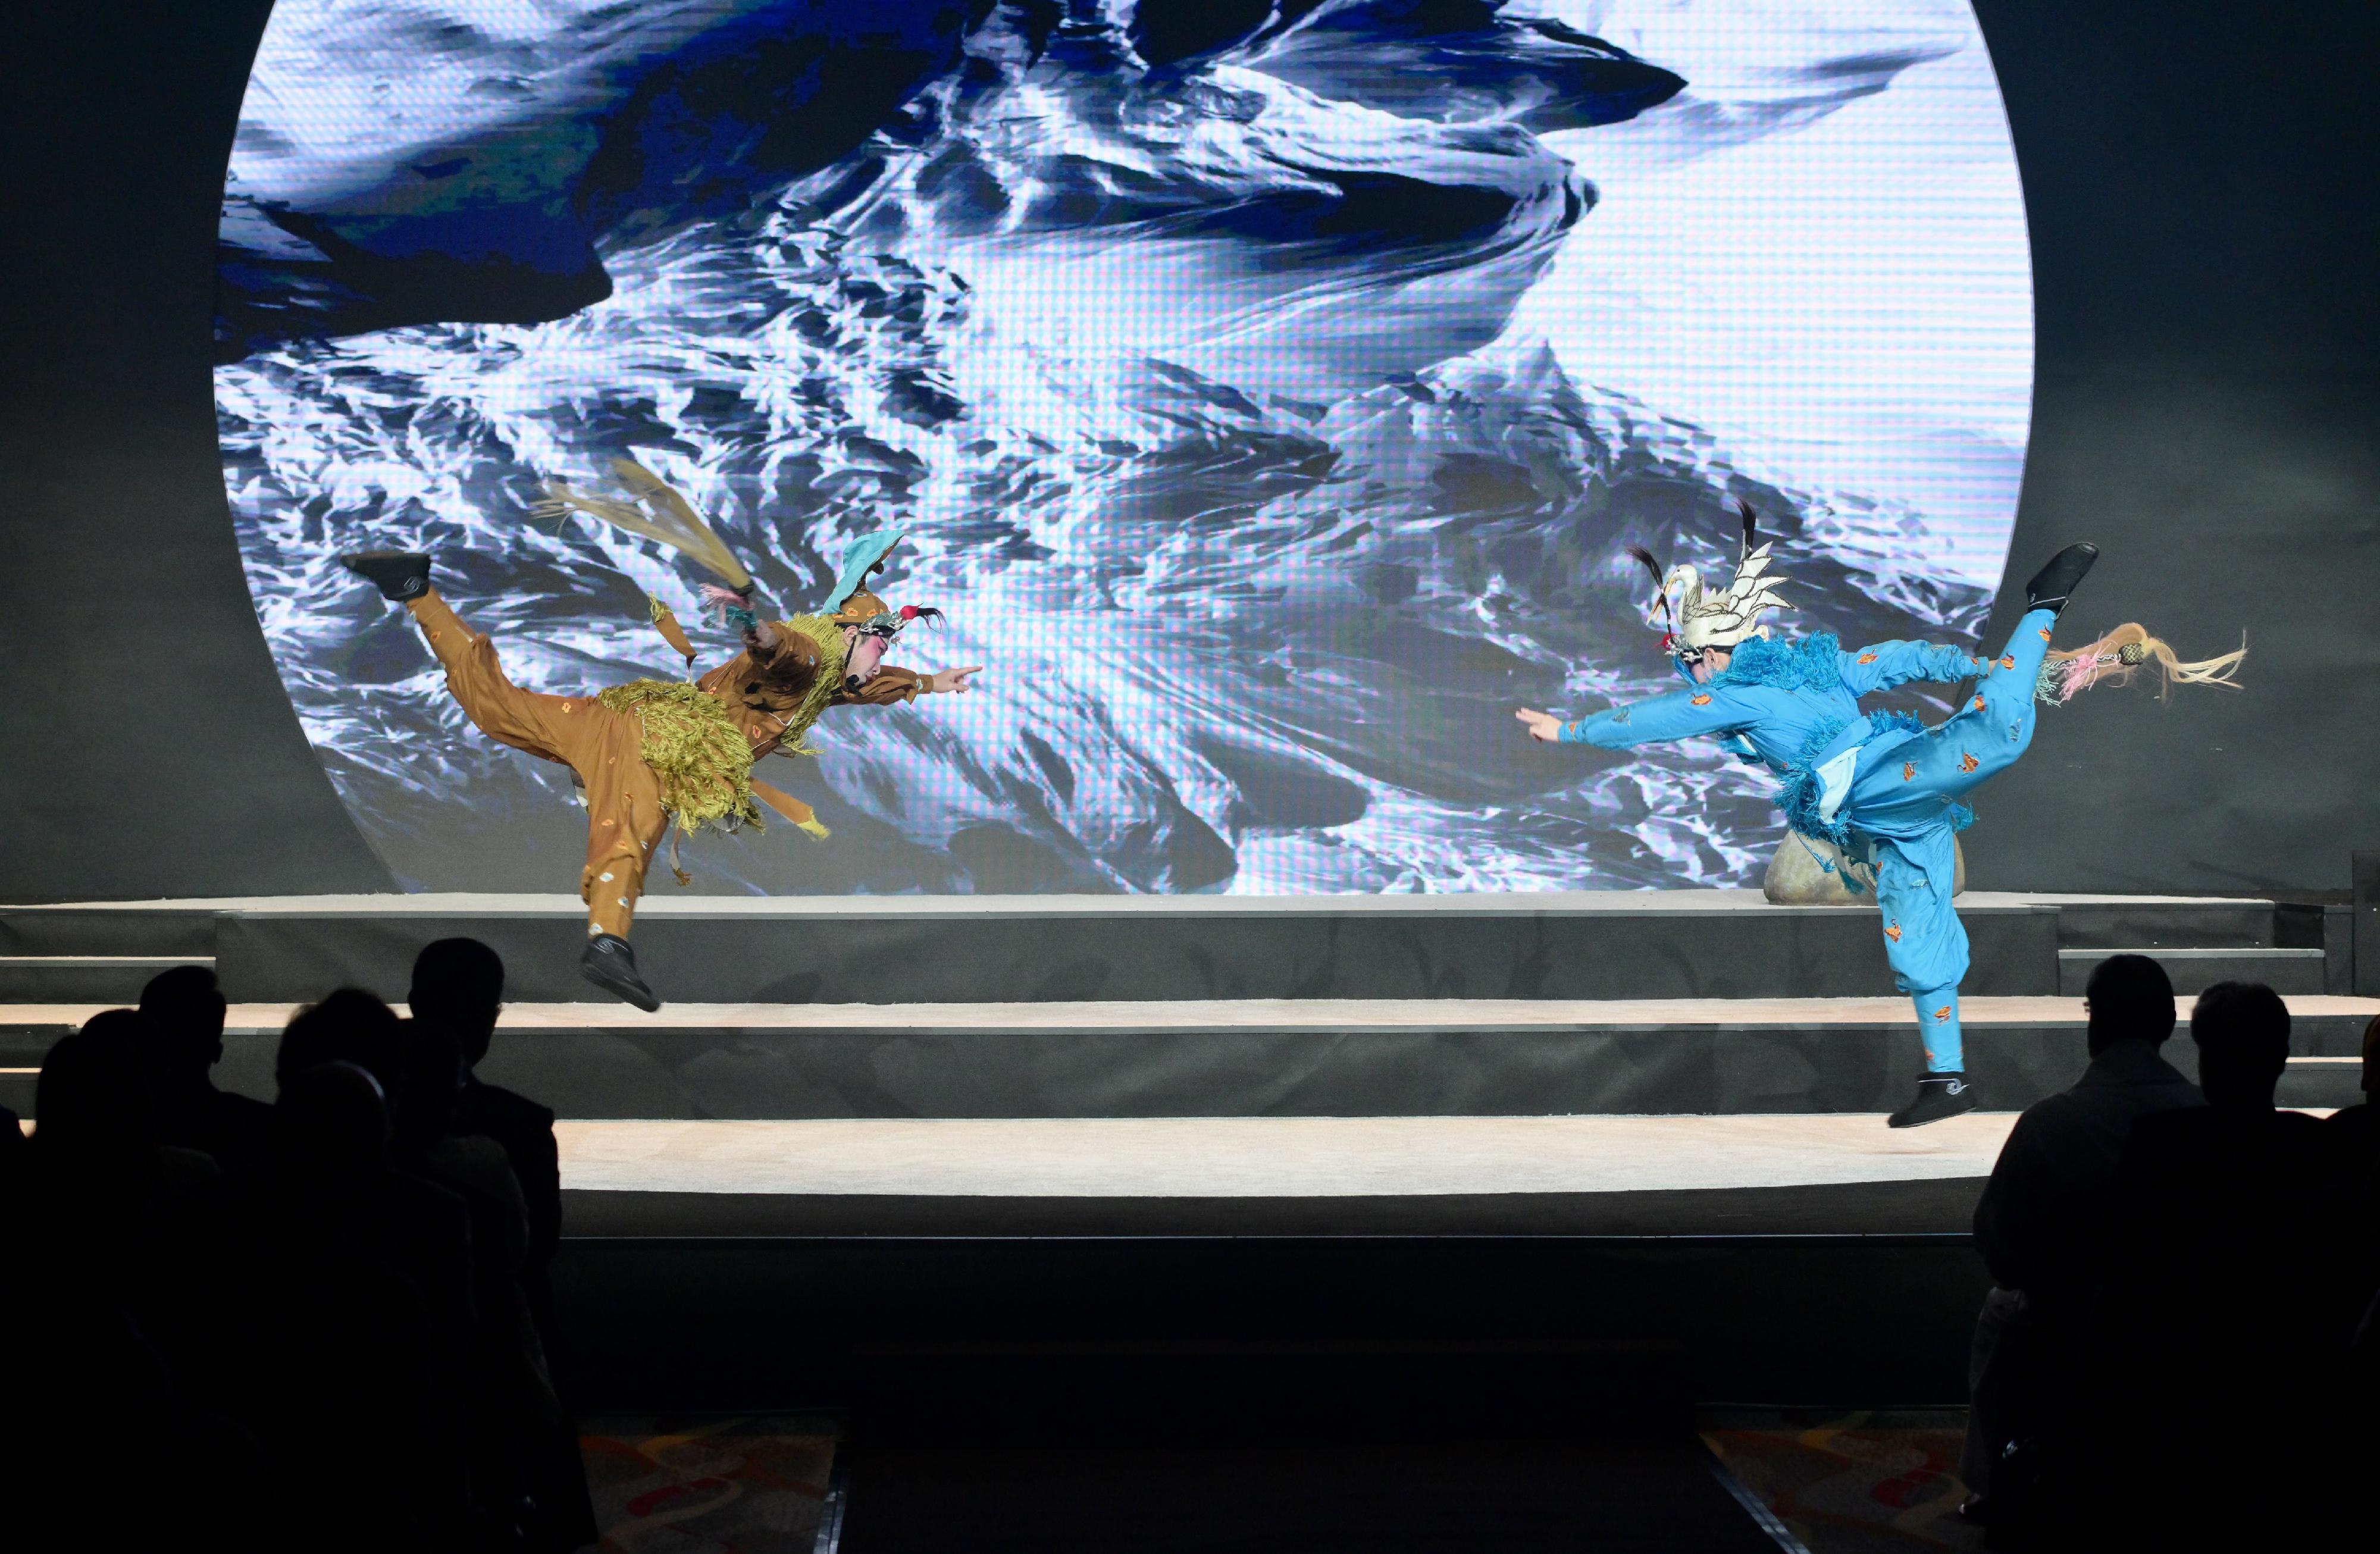 The performance in the Gala concert showcased a blend of Chinese and Western traditional and contemporary music, with multi-media visual effects, showcasing to the guests Hong Kong's position as a cultural melting pot of East and West, and the diversified and uniqueness of Hong Kong's arts talents.